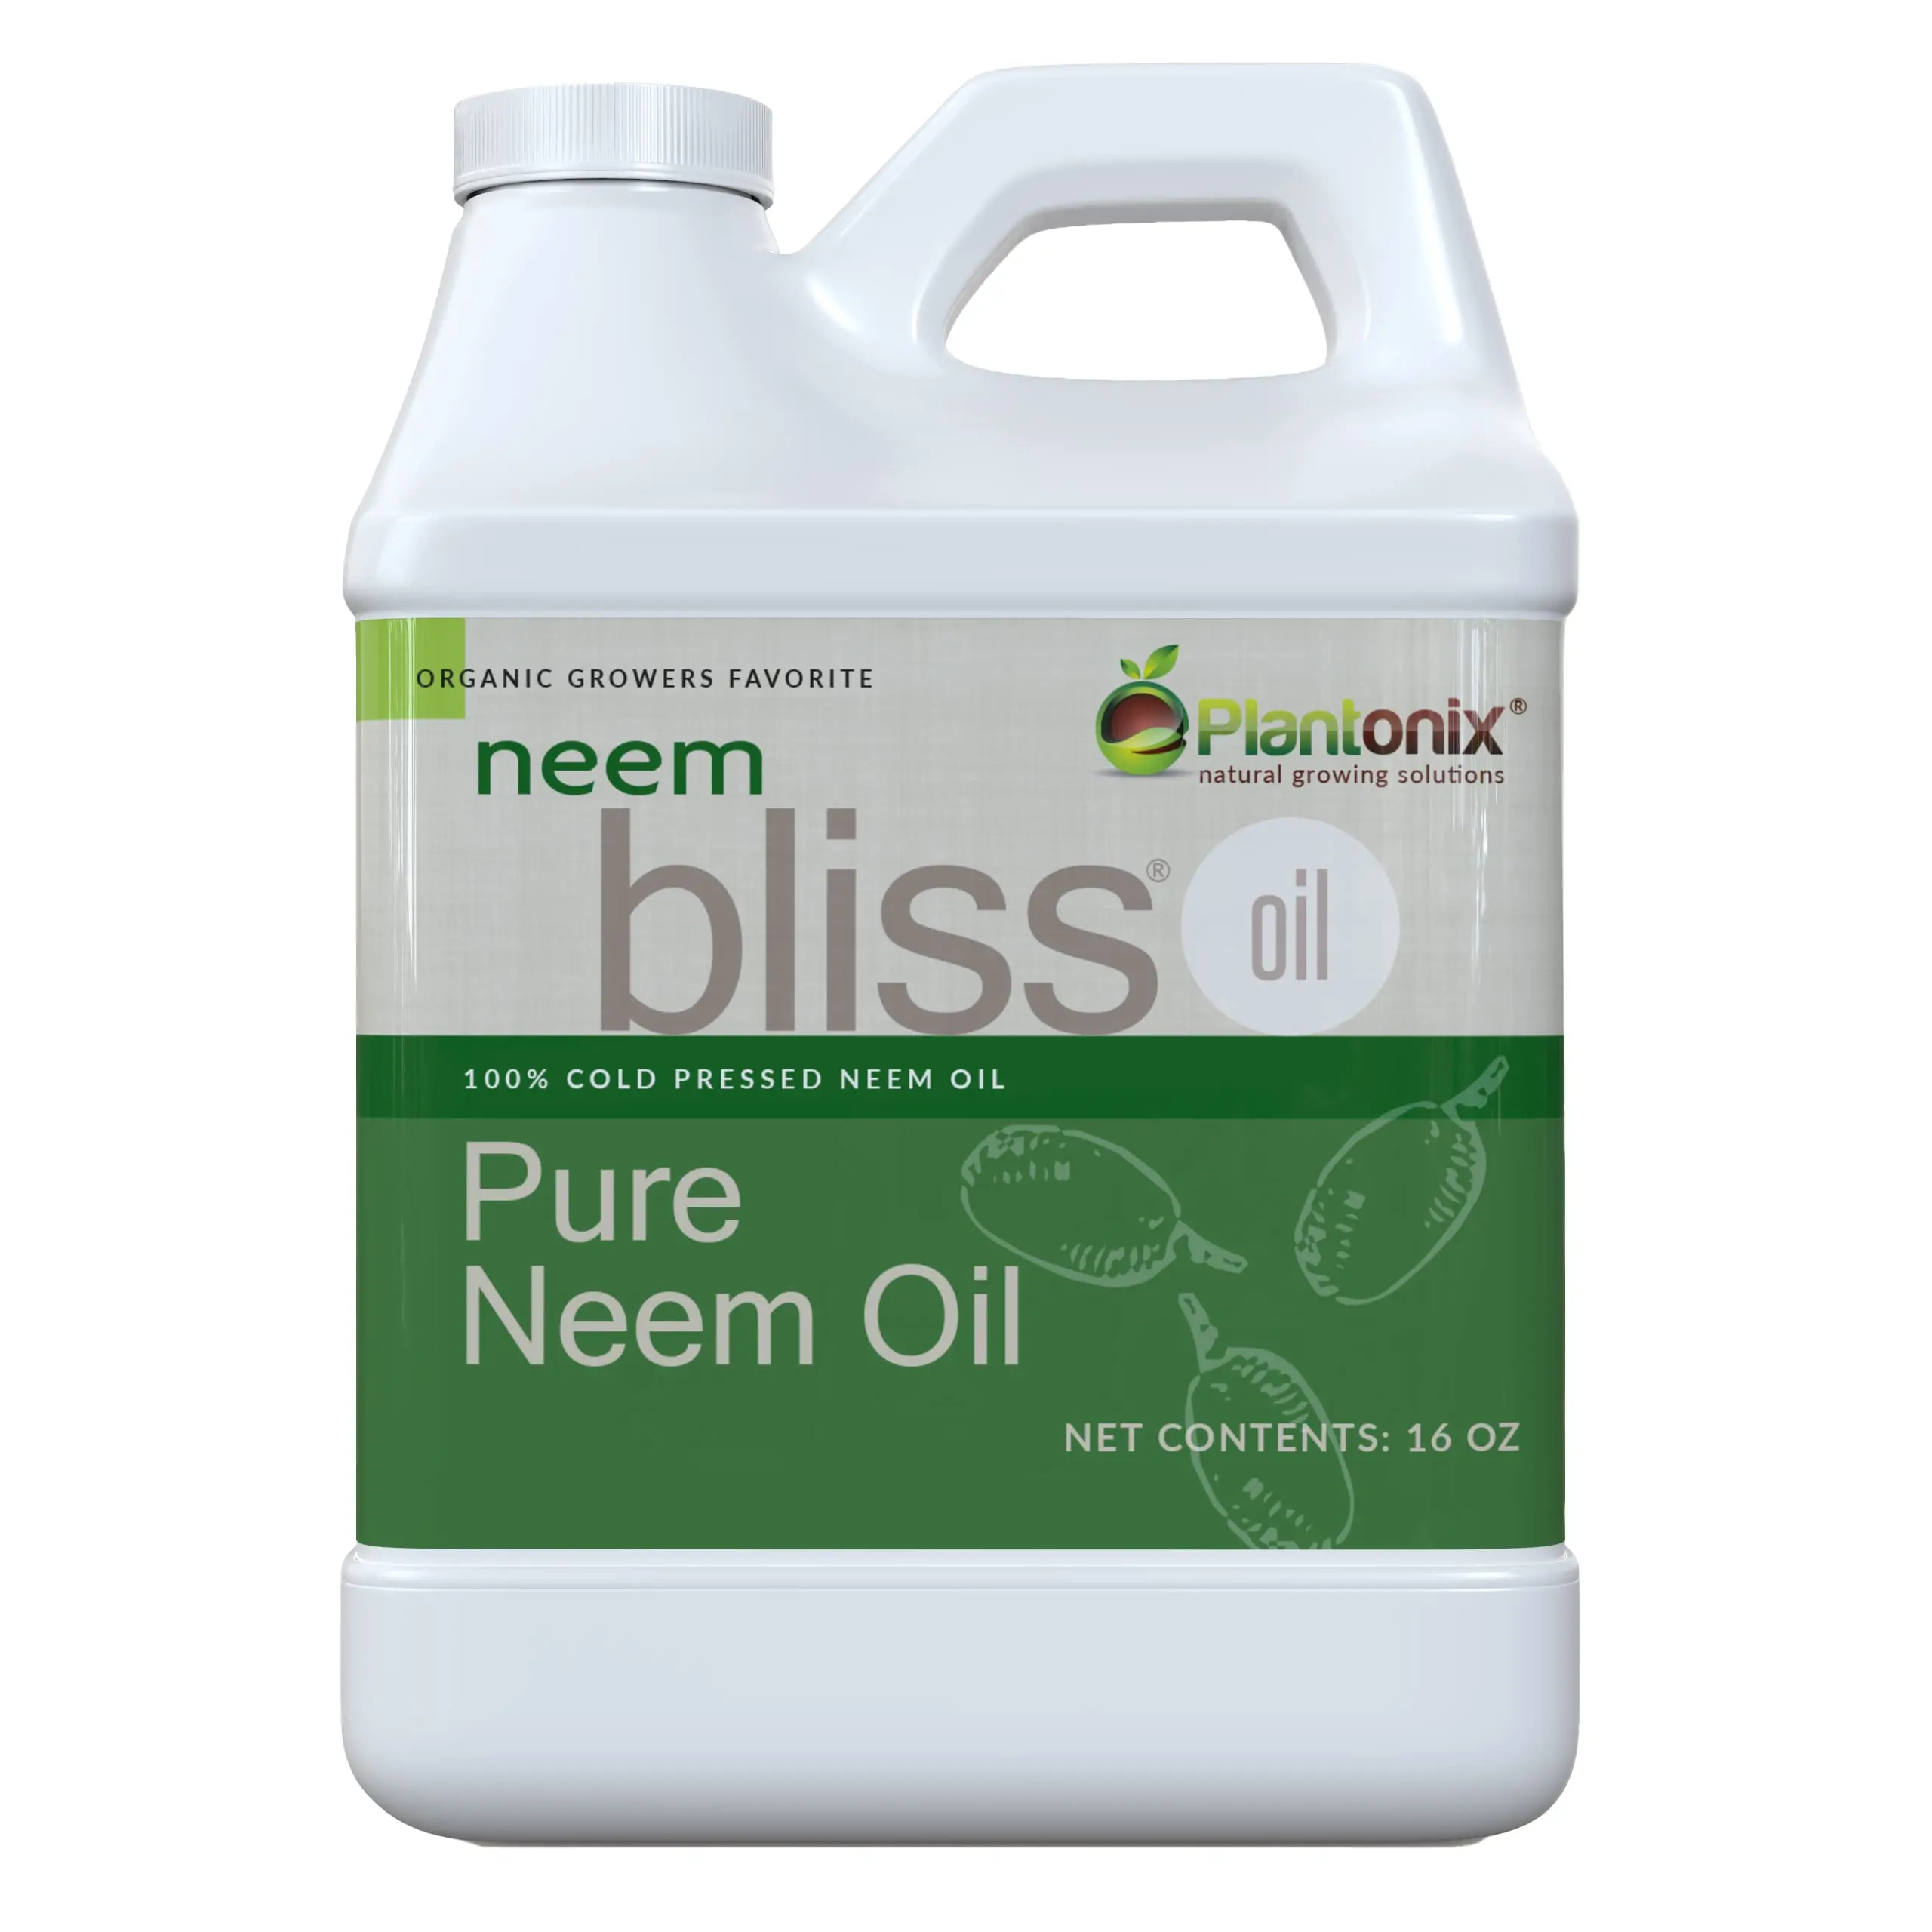 Neem oil: top 5 product round-up